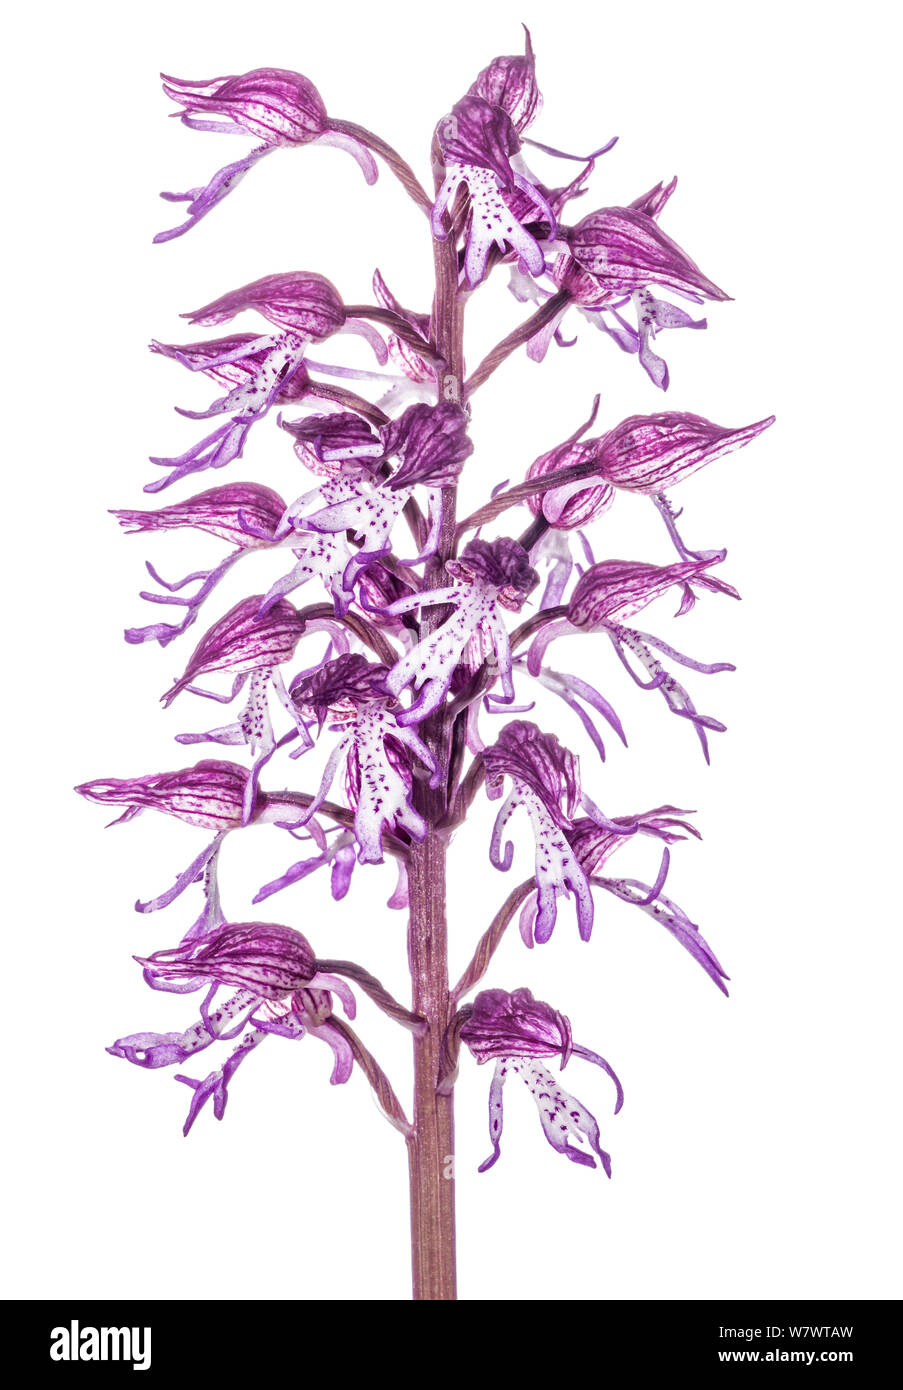 Hybrid orchid (Orchis x angusticruris) in flower, hybird of Lady (Orchis pururea) and Monkey orchid (Orchis simia), near Torrealfina, Lazio, Italy, May. Stock Photo